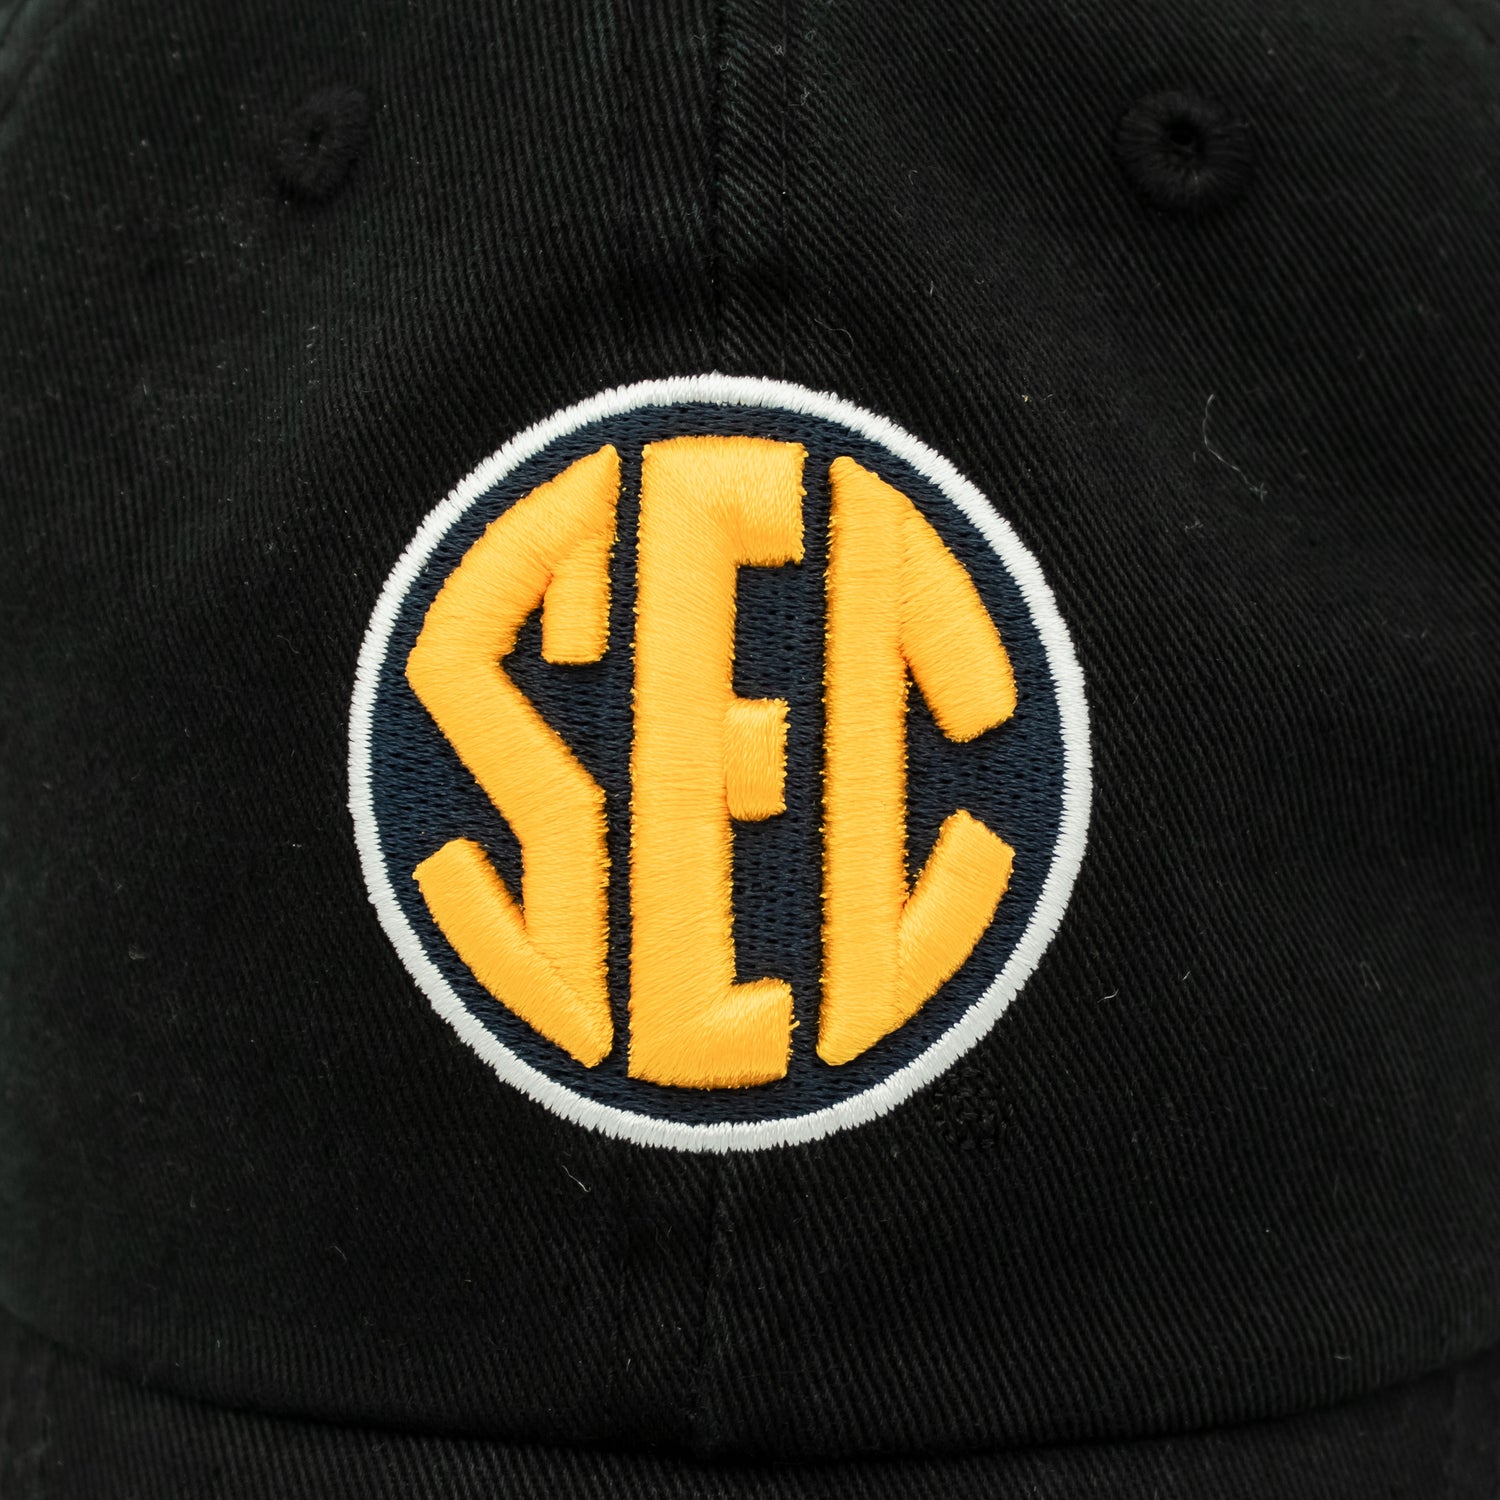 Southeastern Conference Logos Hat